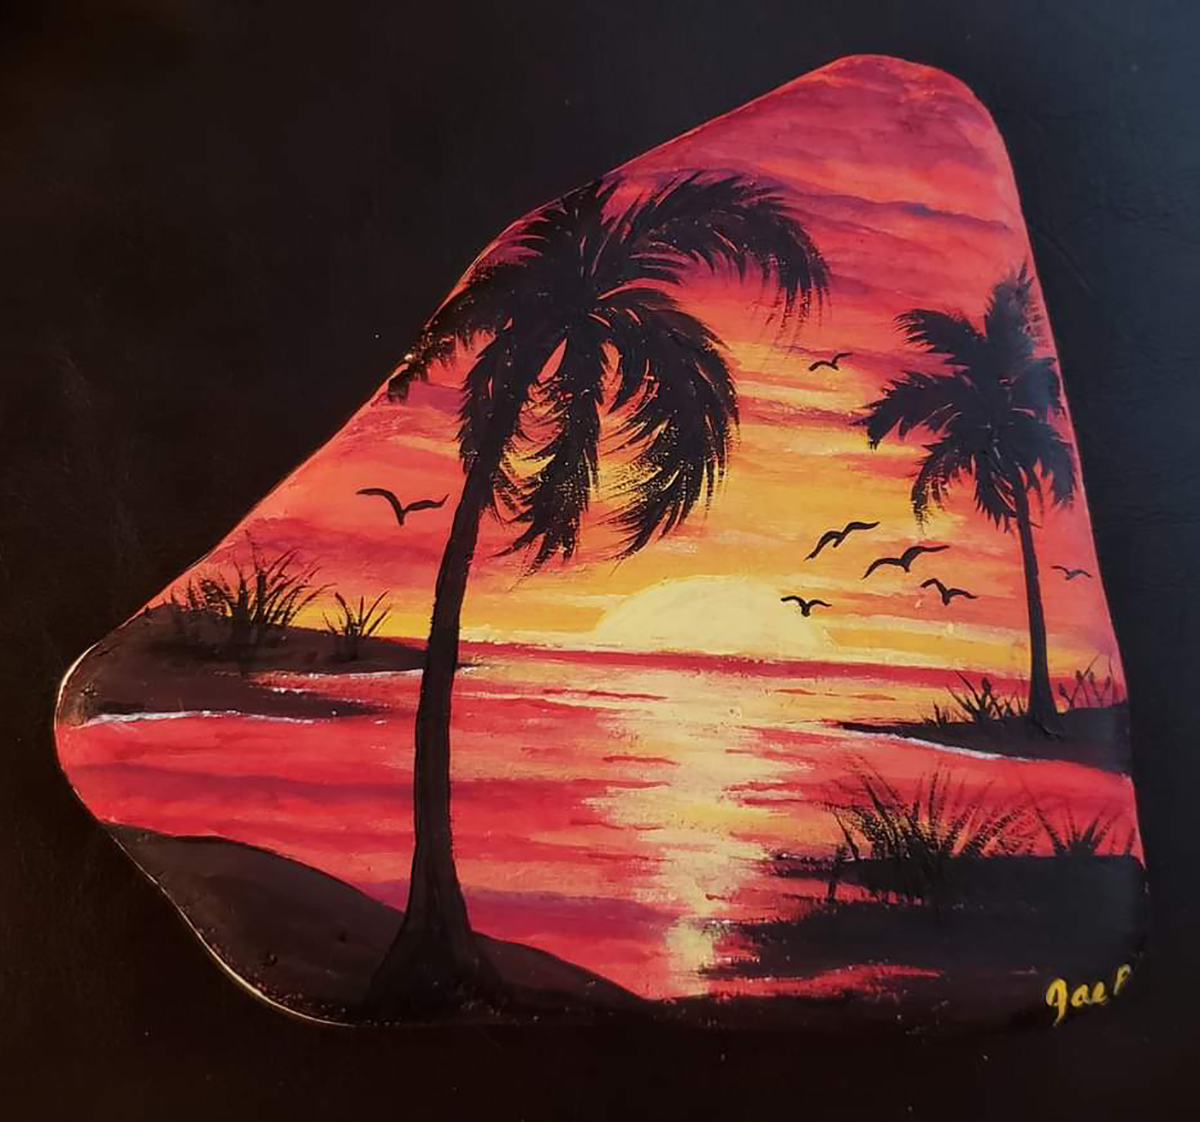 Image of red and gold sunset with sun, two palm trees and seagulls, painted on Santorini stone.